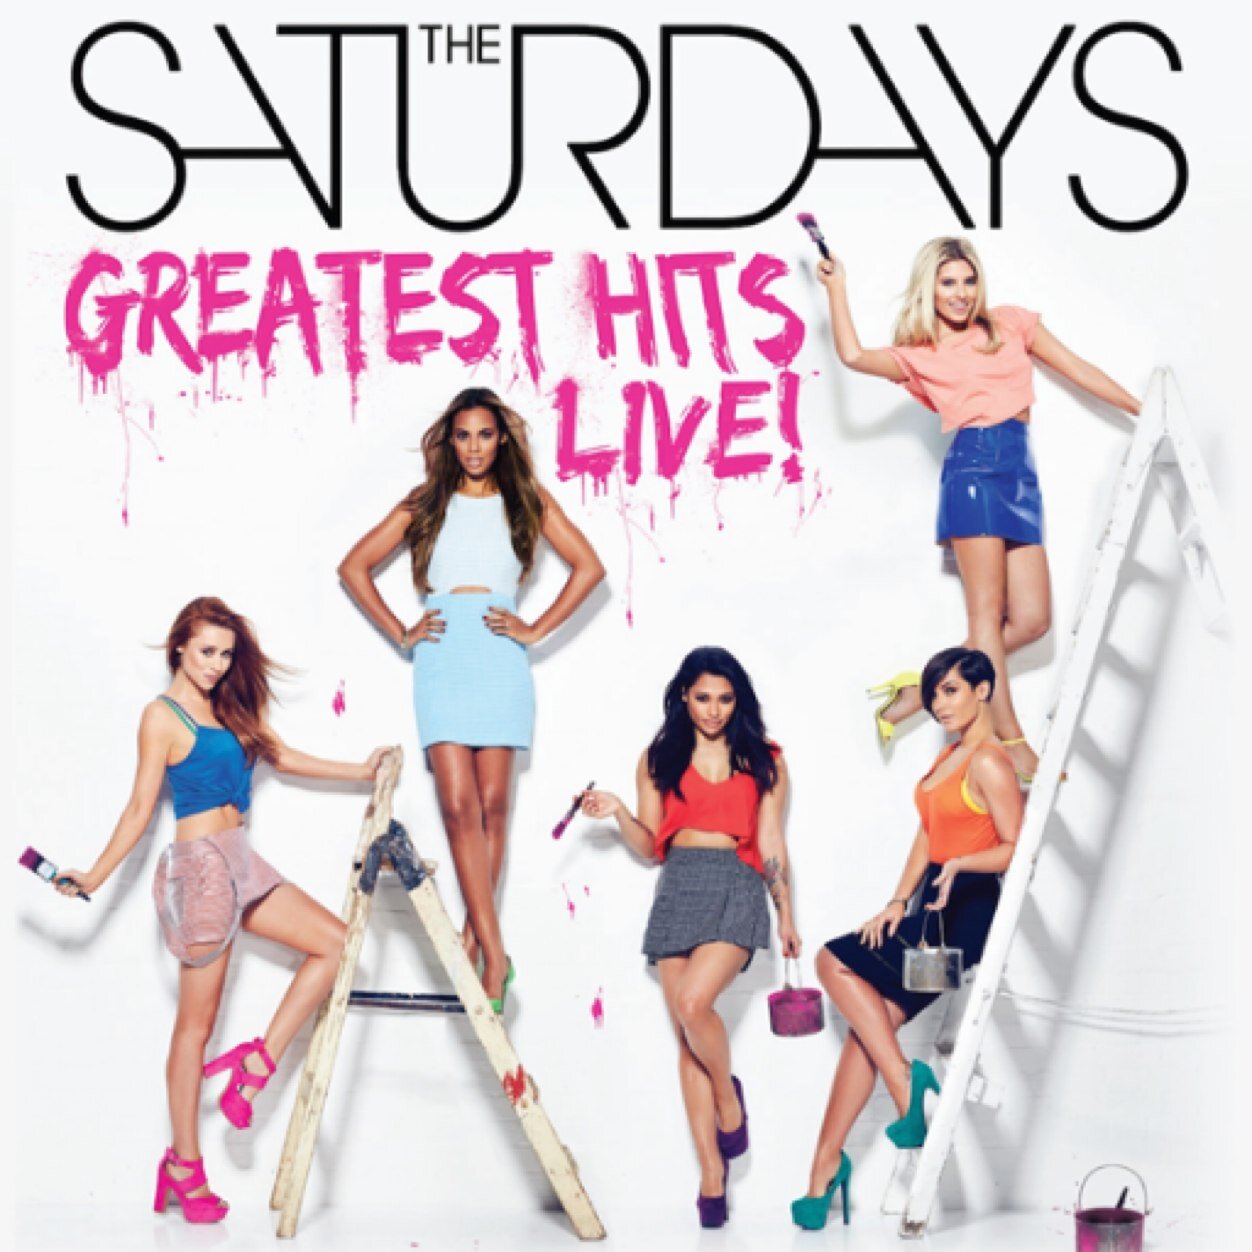 Press release news and updates on The Saturdays. Mollie follows!